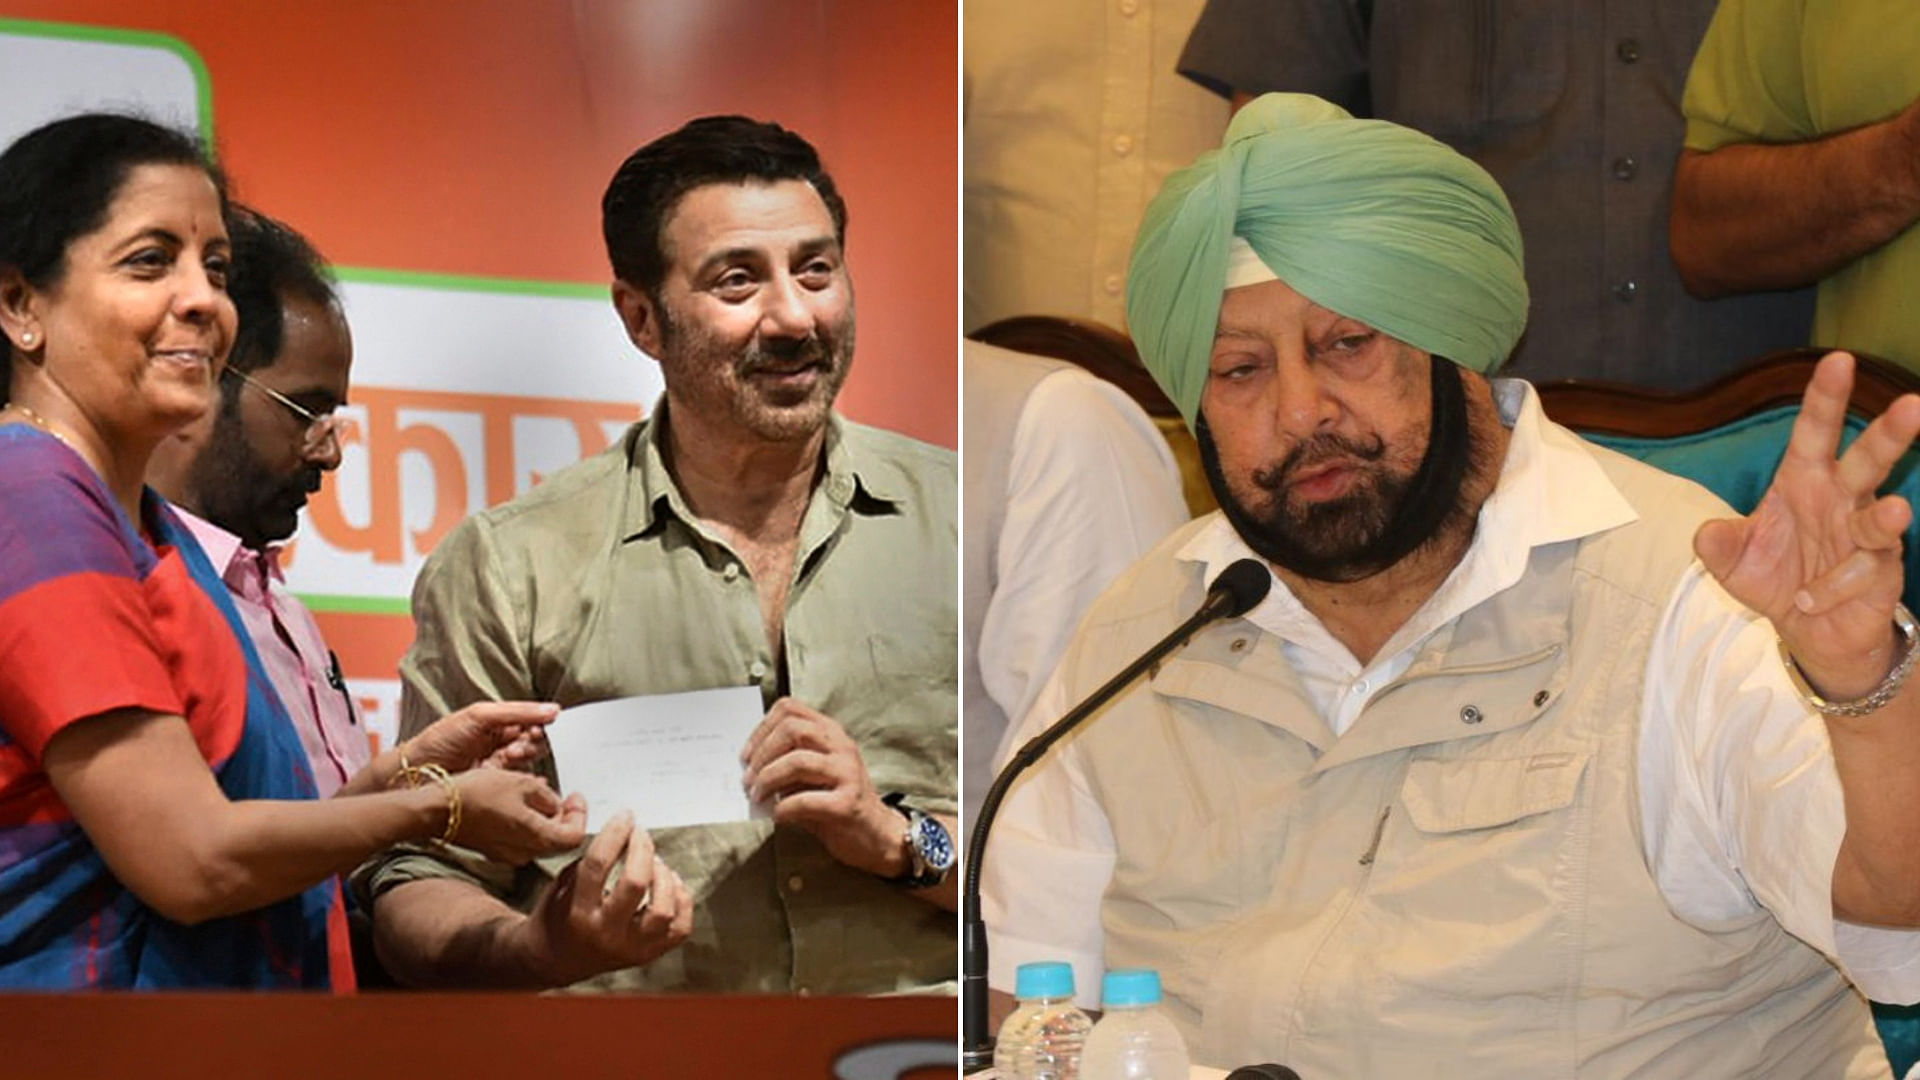  Actor Sunny Deol (L) presented with membership slip as he joins the party, at BJP headquarter in New Delhi. Captain Amarinder Singh (R).